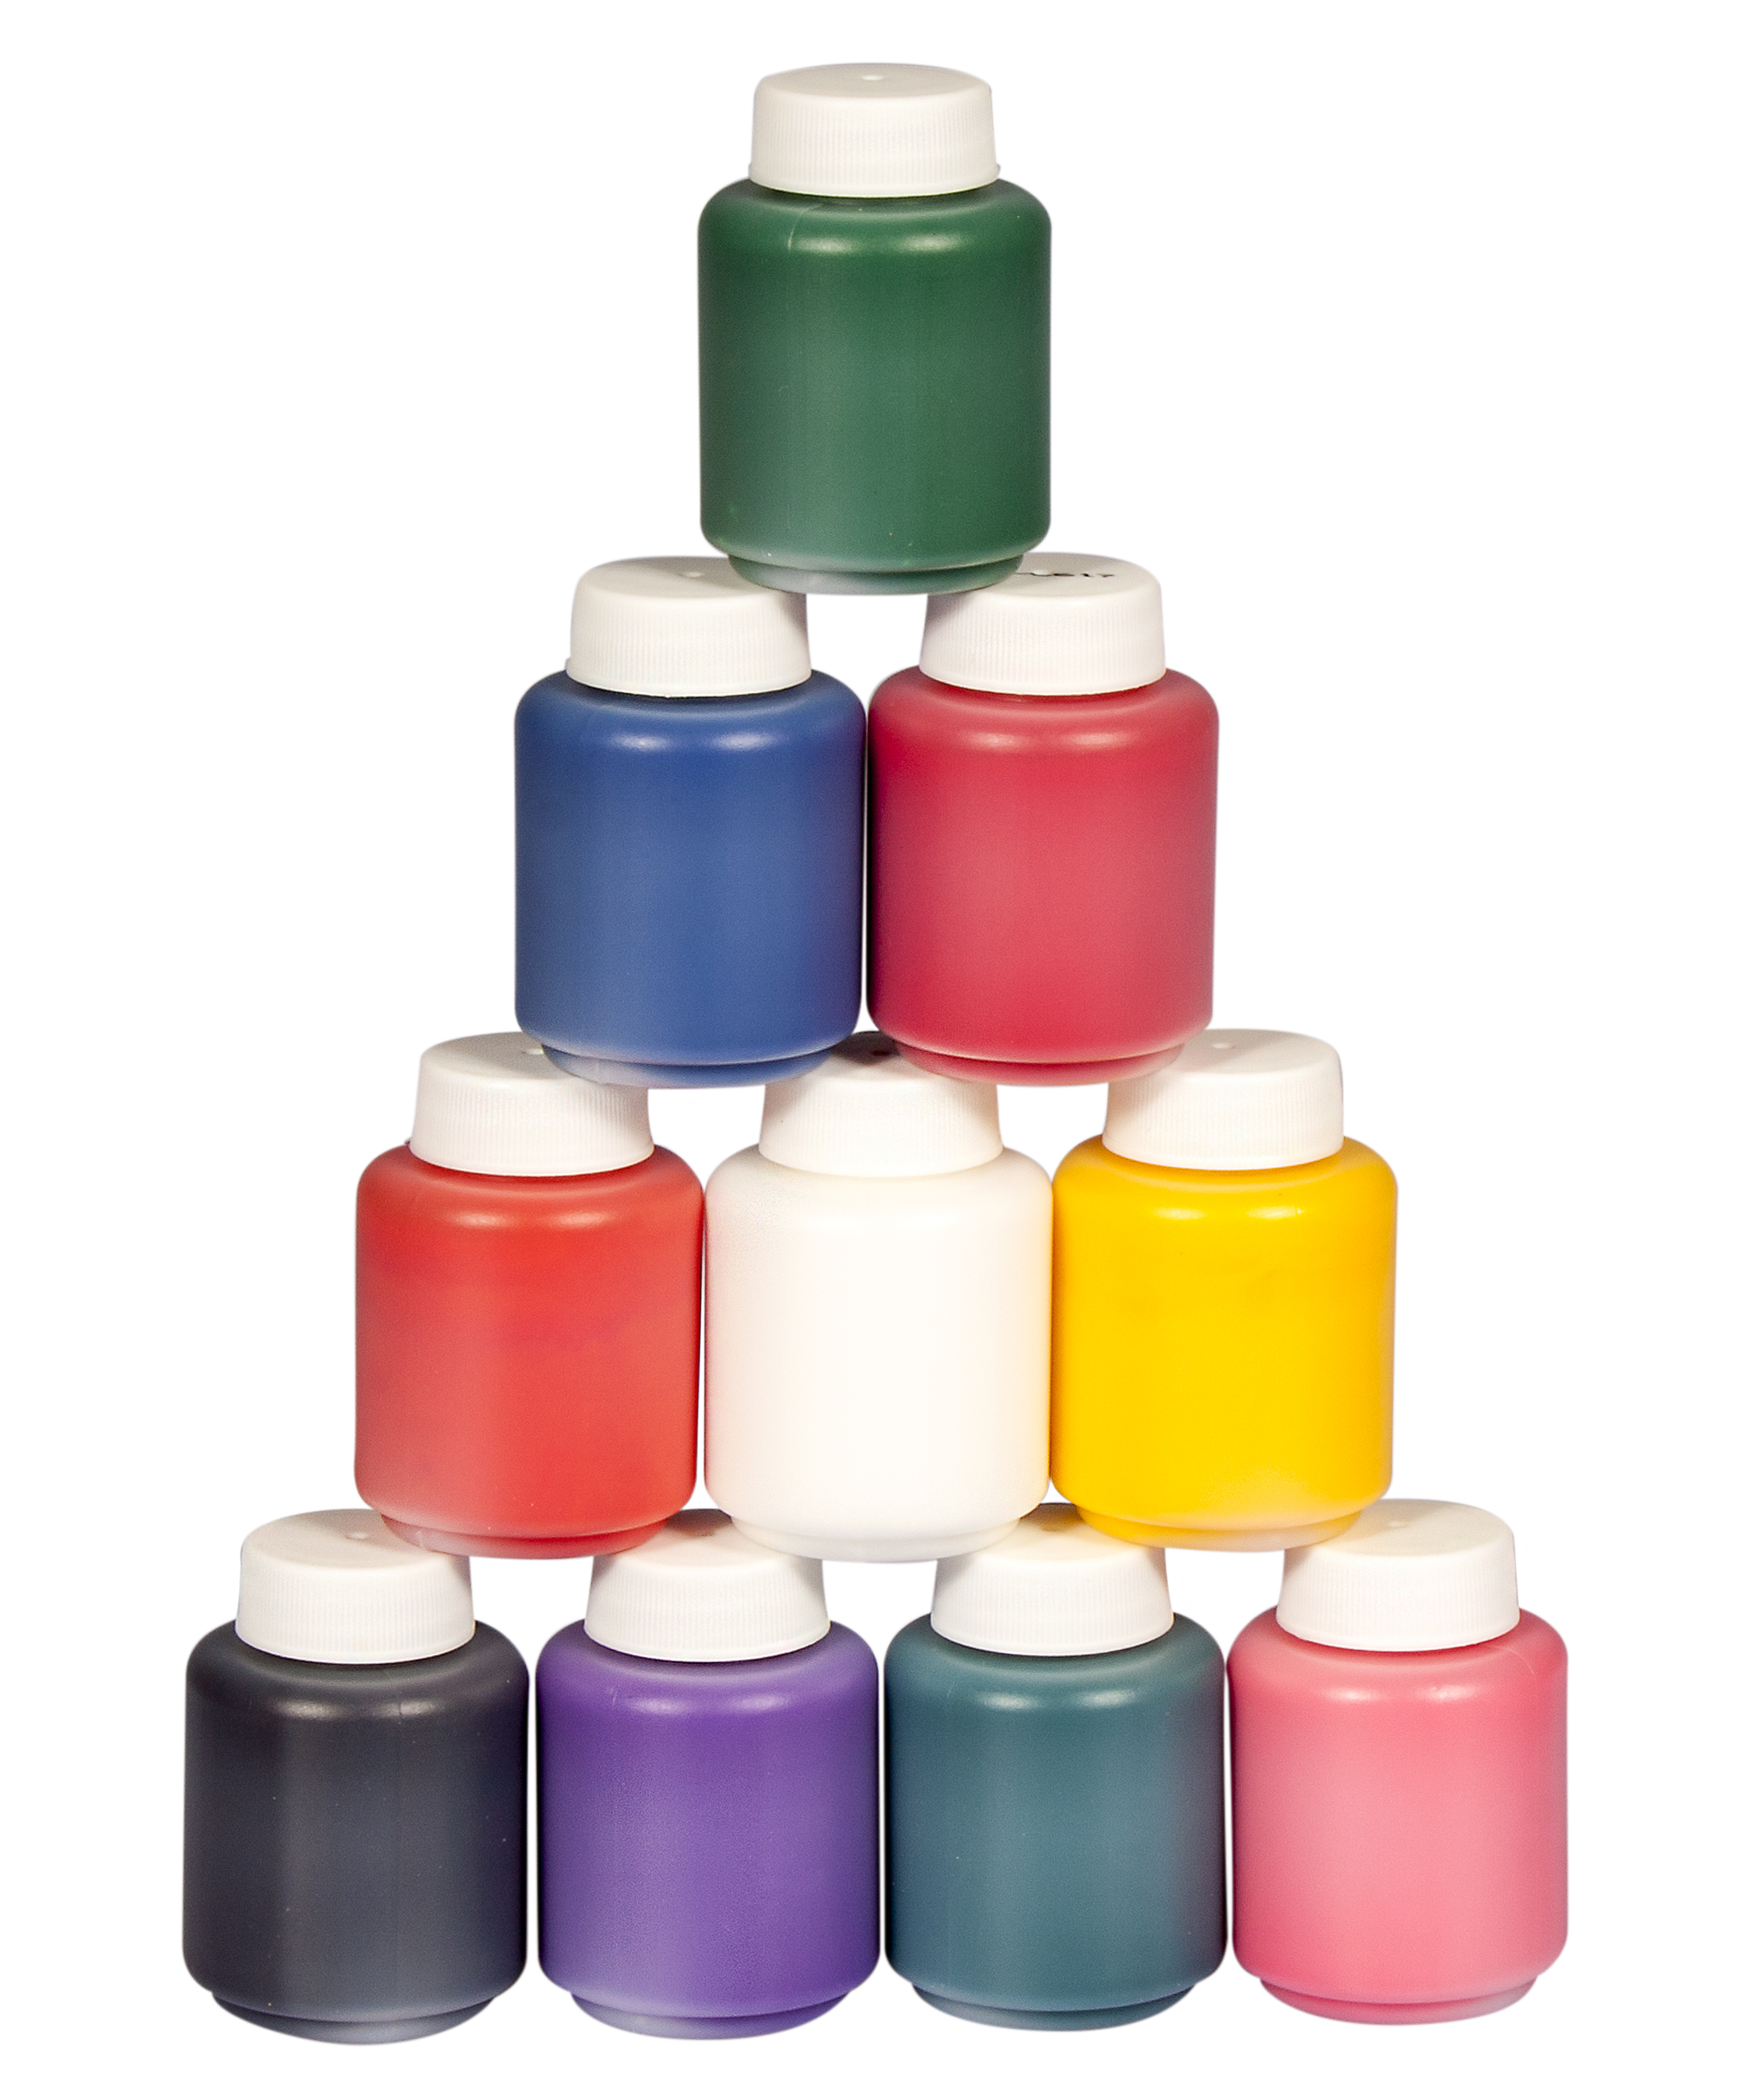 Cra-Z-Art 10 Count Multicolor Washable Paint, Ages 3 and up, Back to School Supplies - image 5 of 7